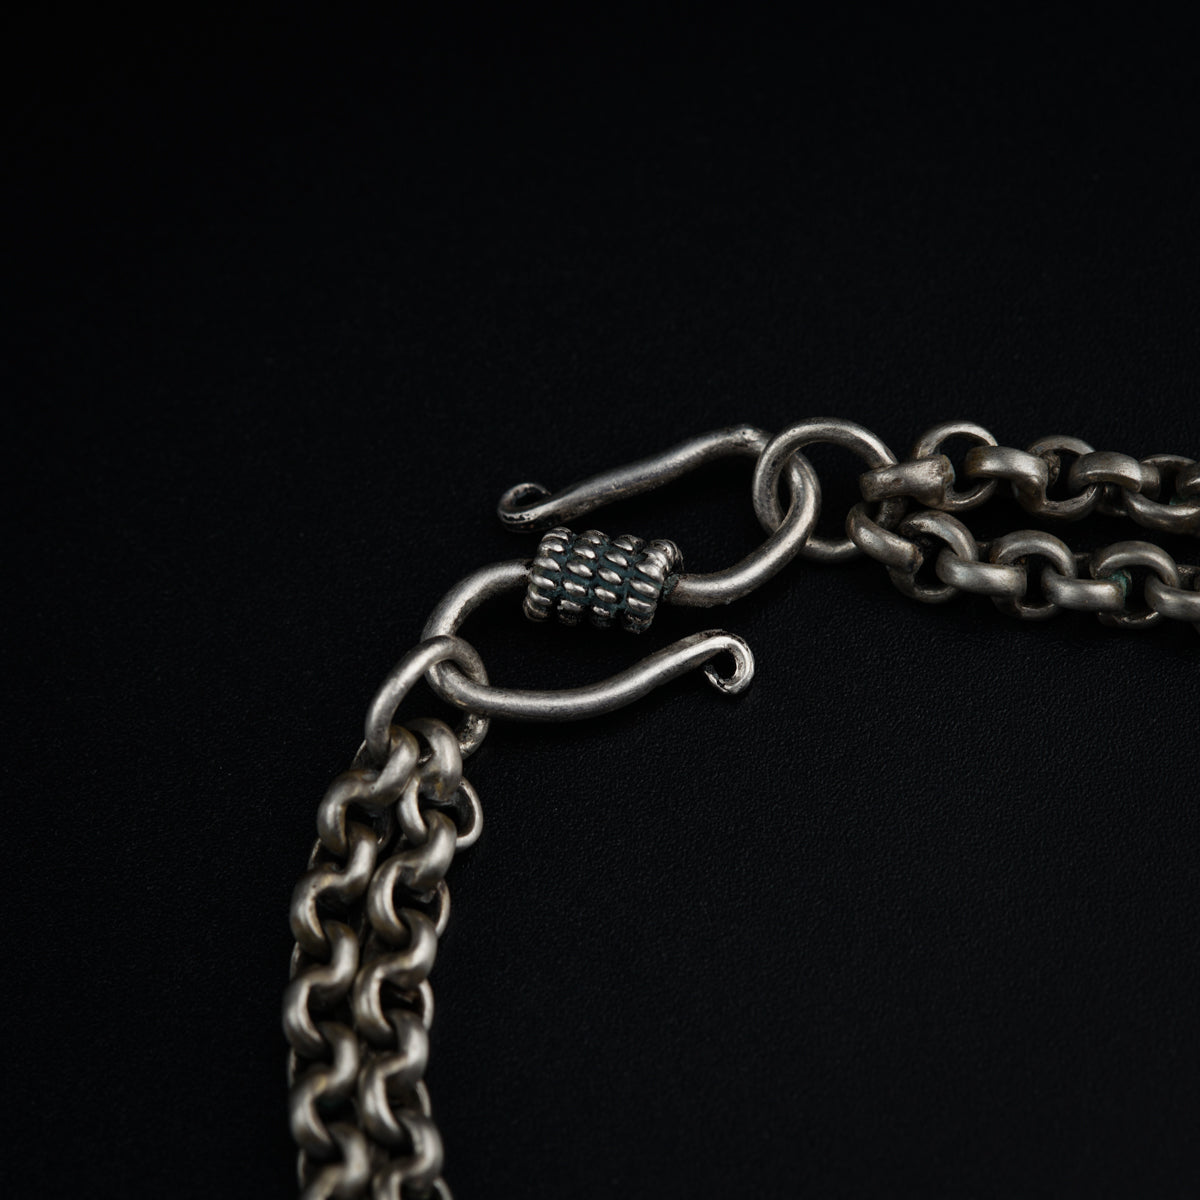 a close up of a chain with a lock on it